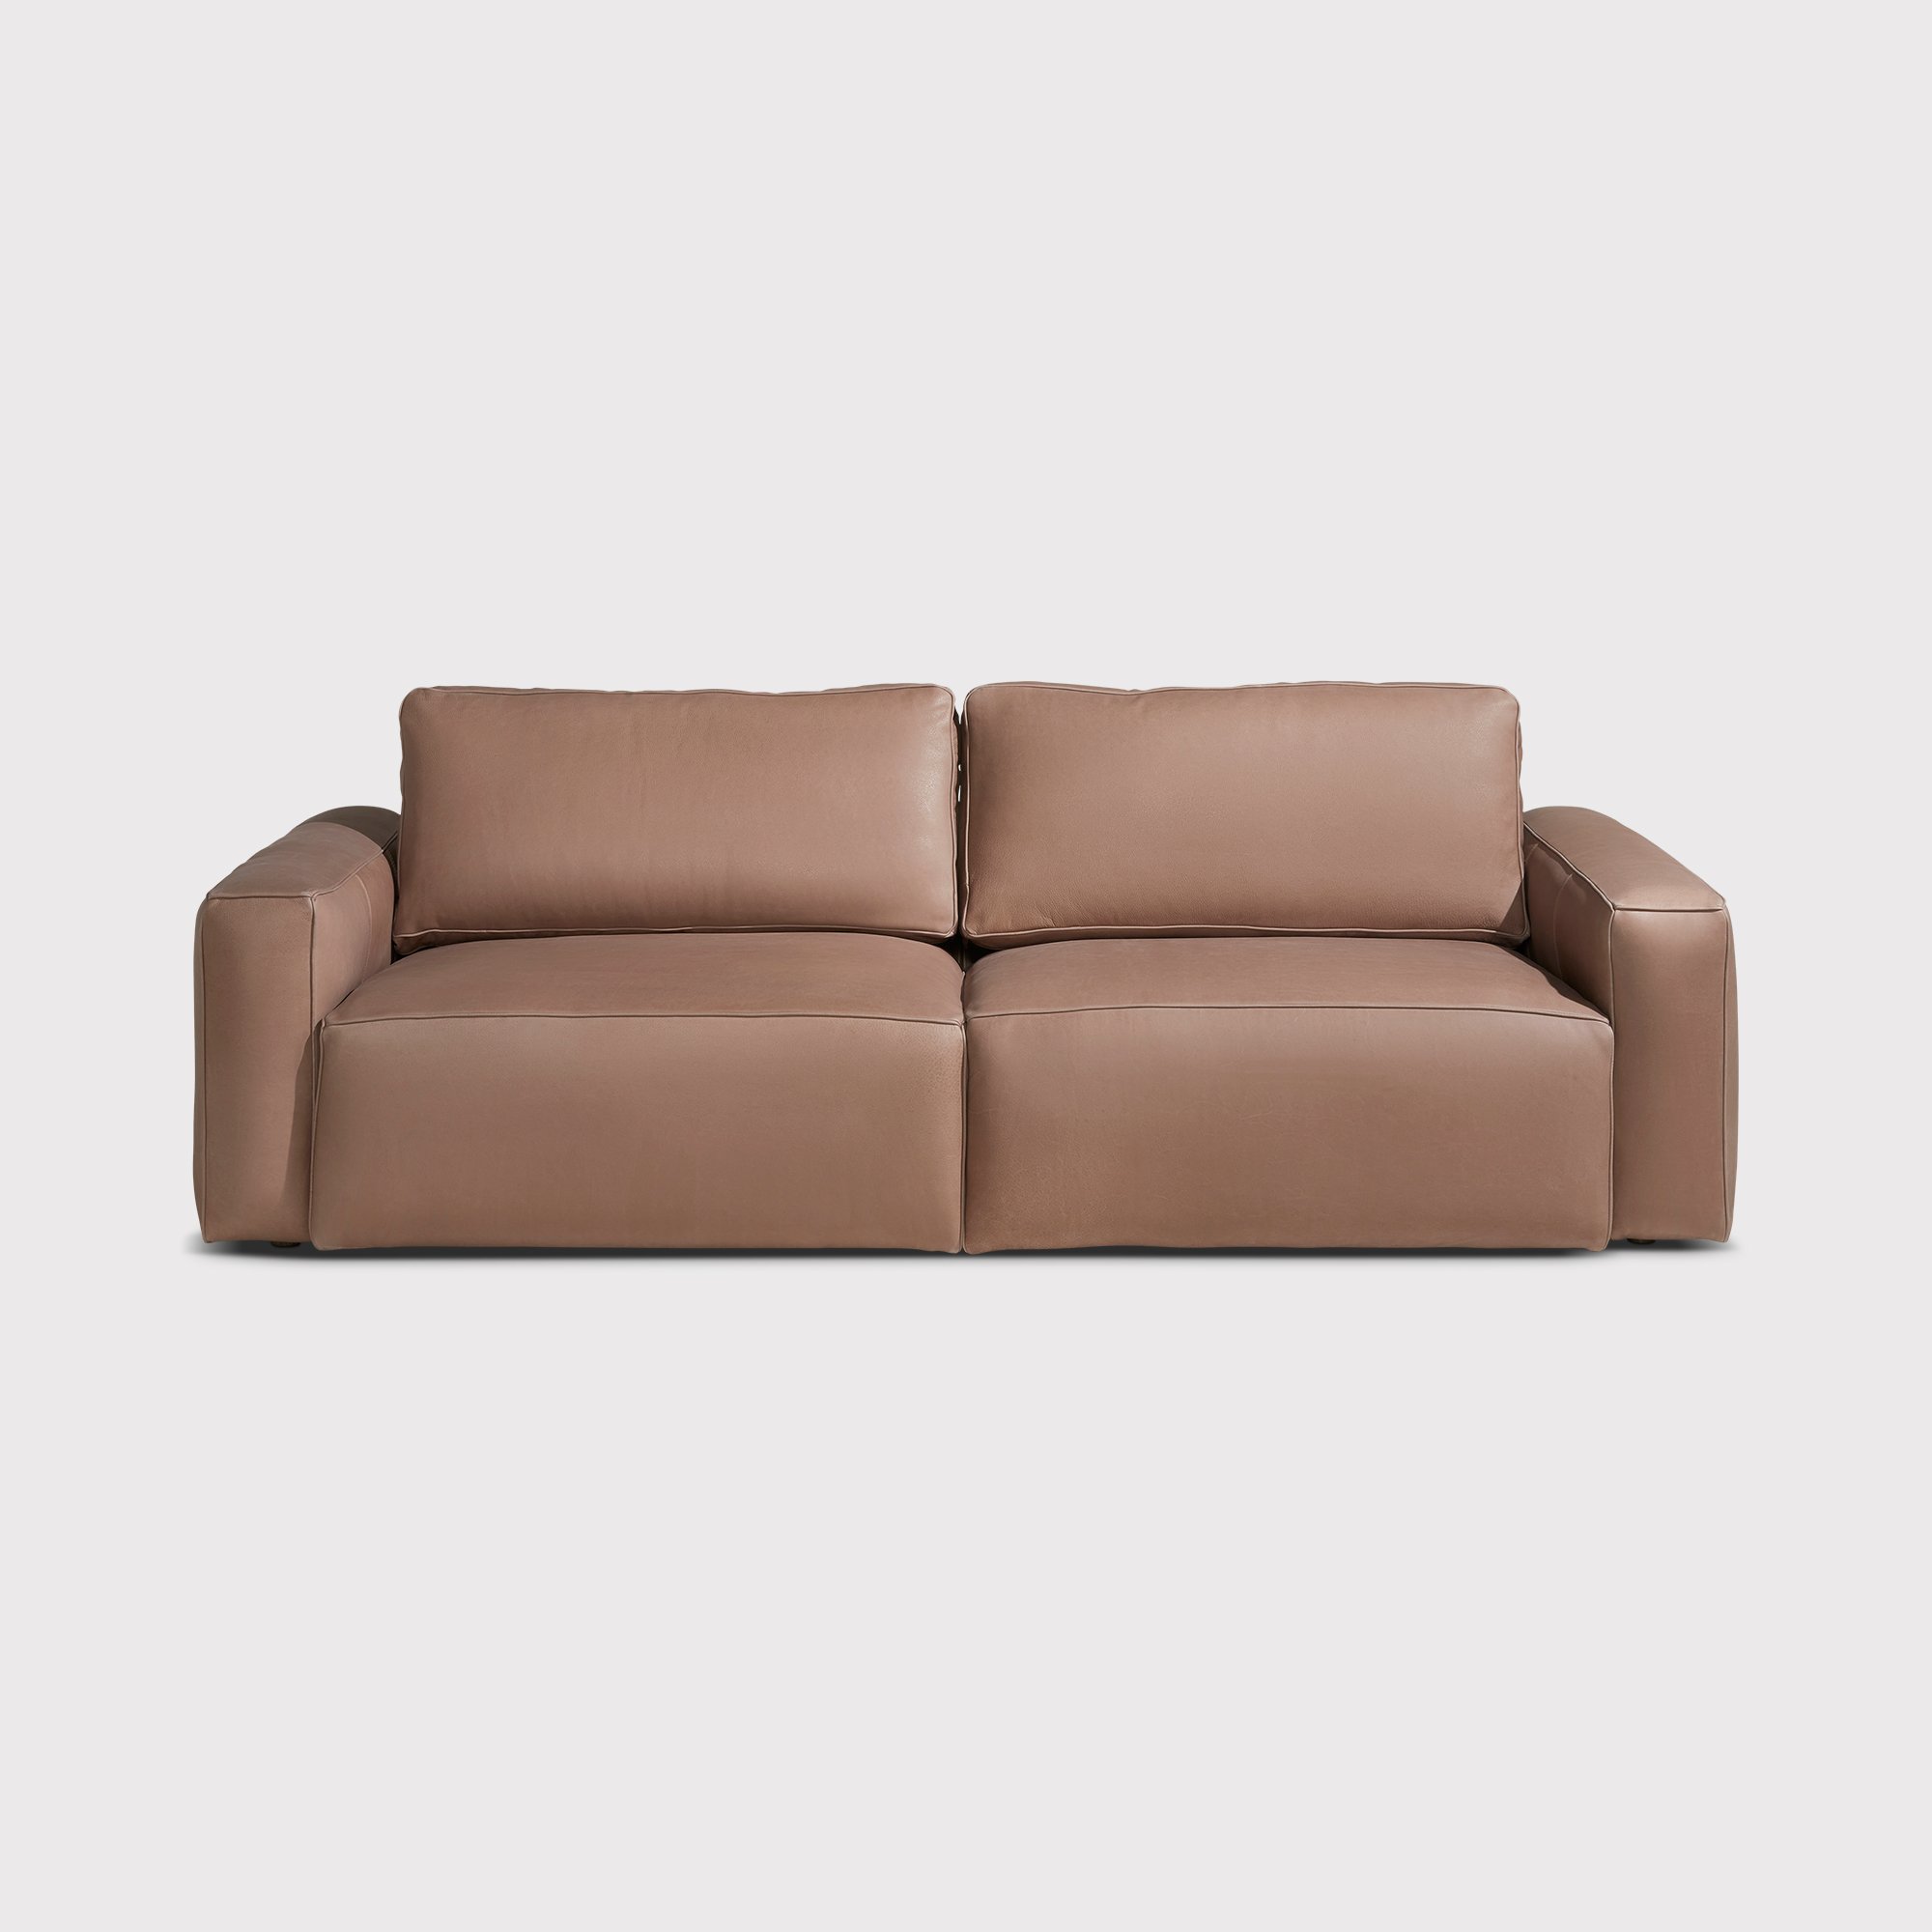 Finsbury 3 Seater Sofa, Brown | Barker & Stonehouse